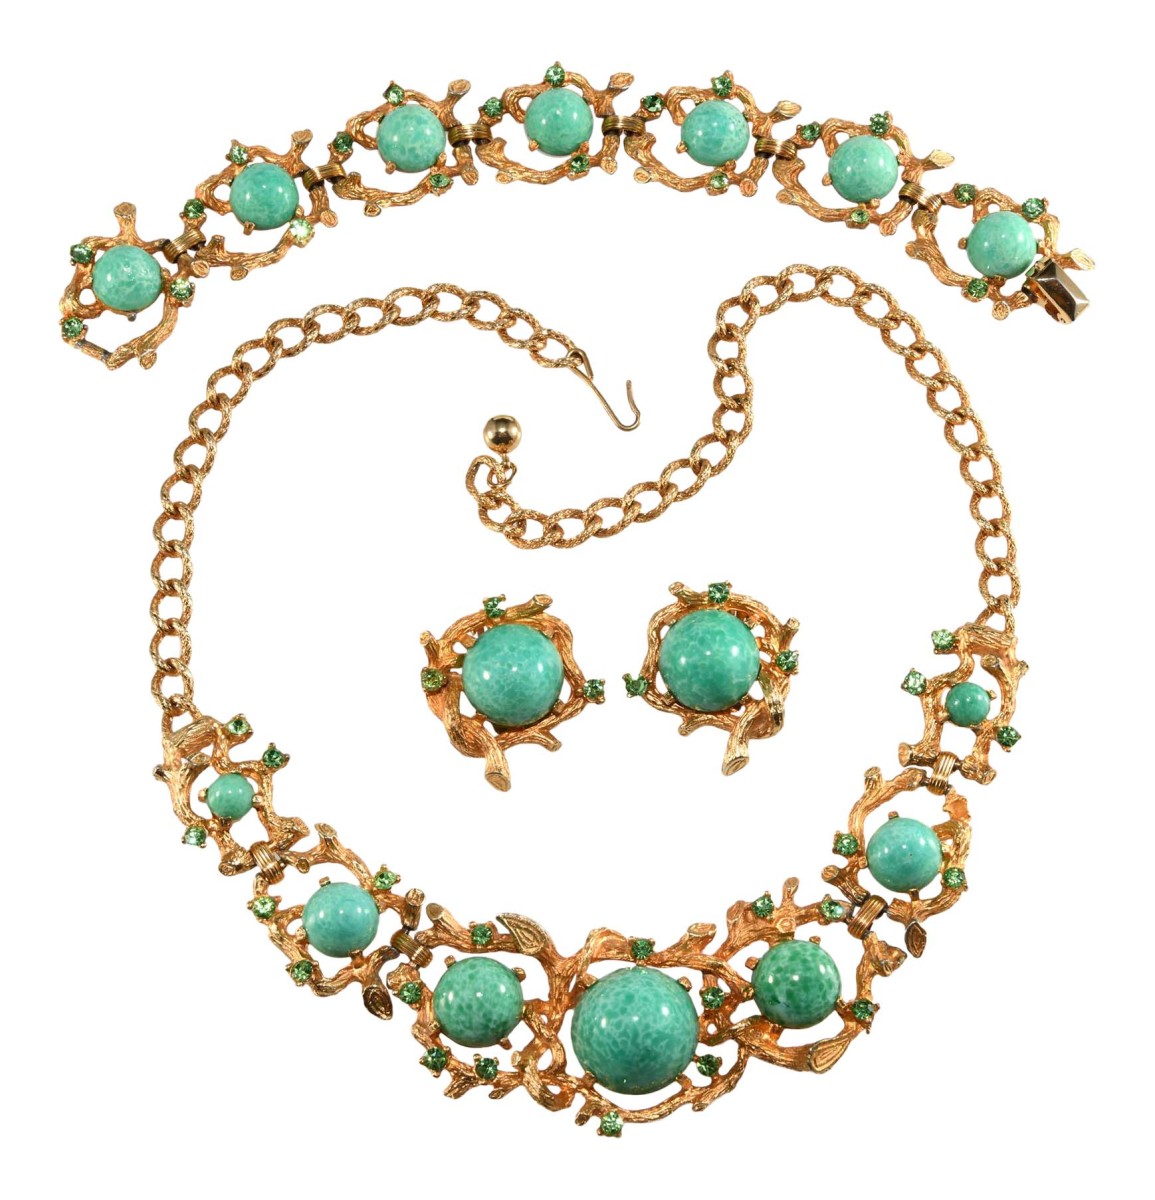 Sublime Mercies: The ABCs of Collecting Vintage Costume Jewelry: A -G